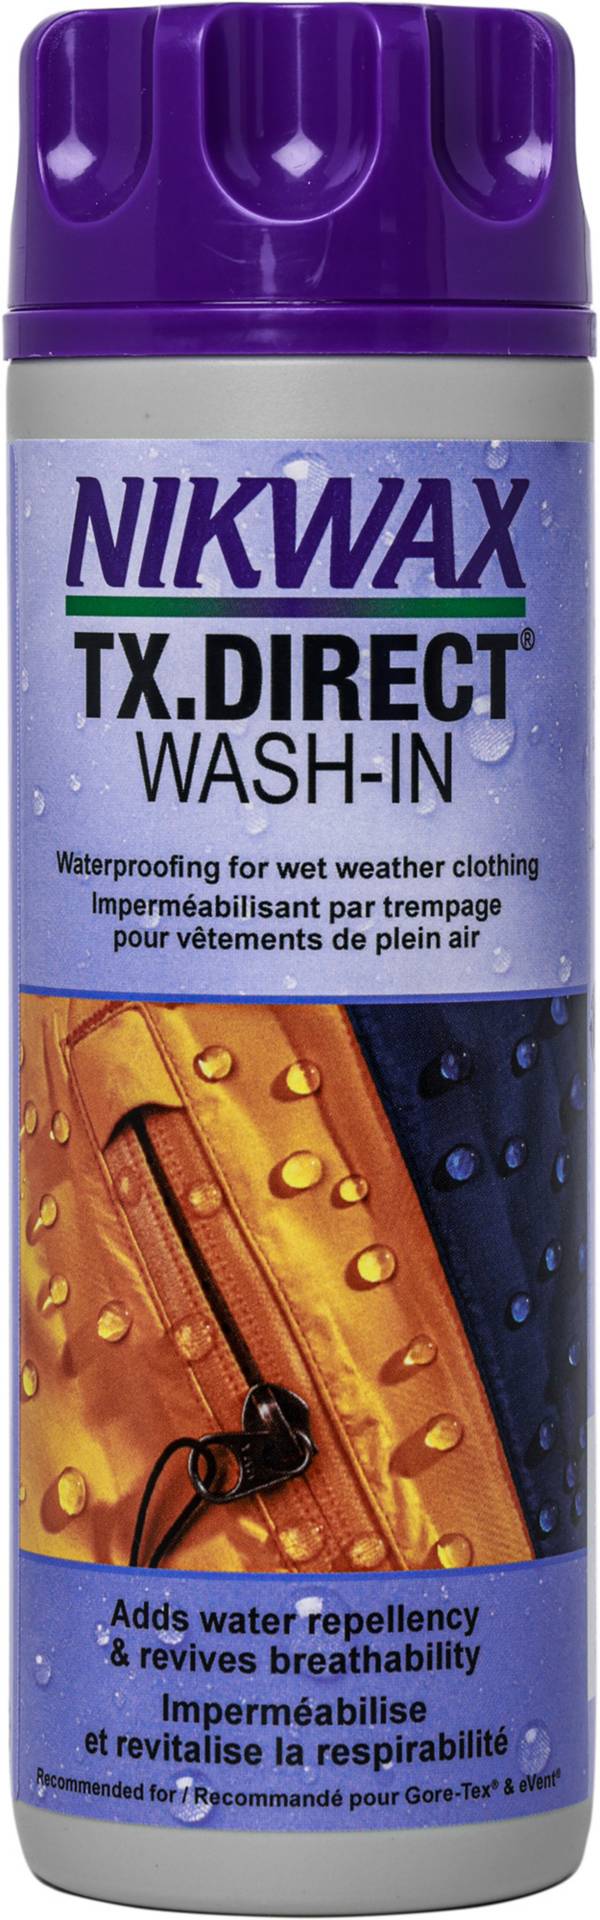 lindre Kostbar Skov Nikwax TX Direct Wash-In | Dick's Sporting Goods